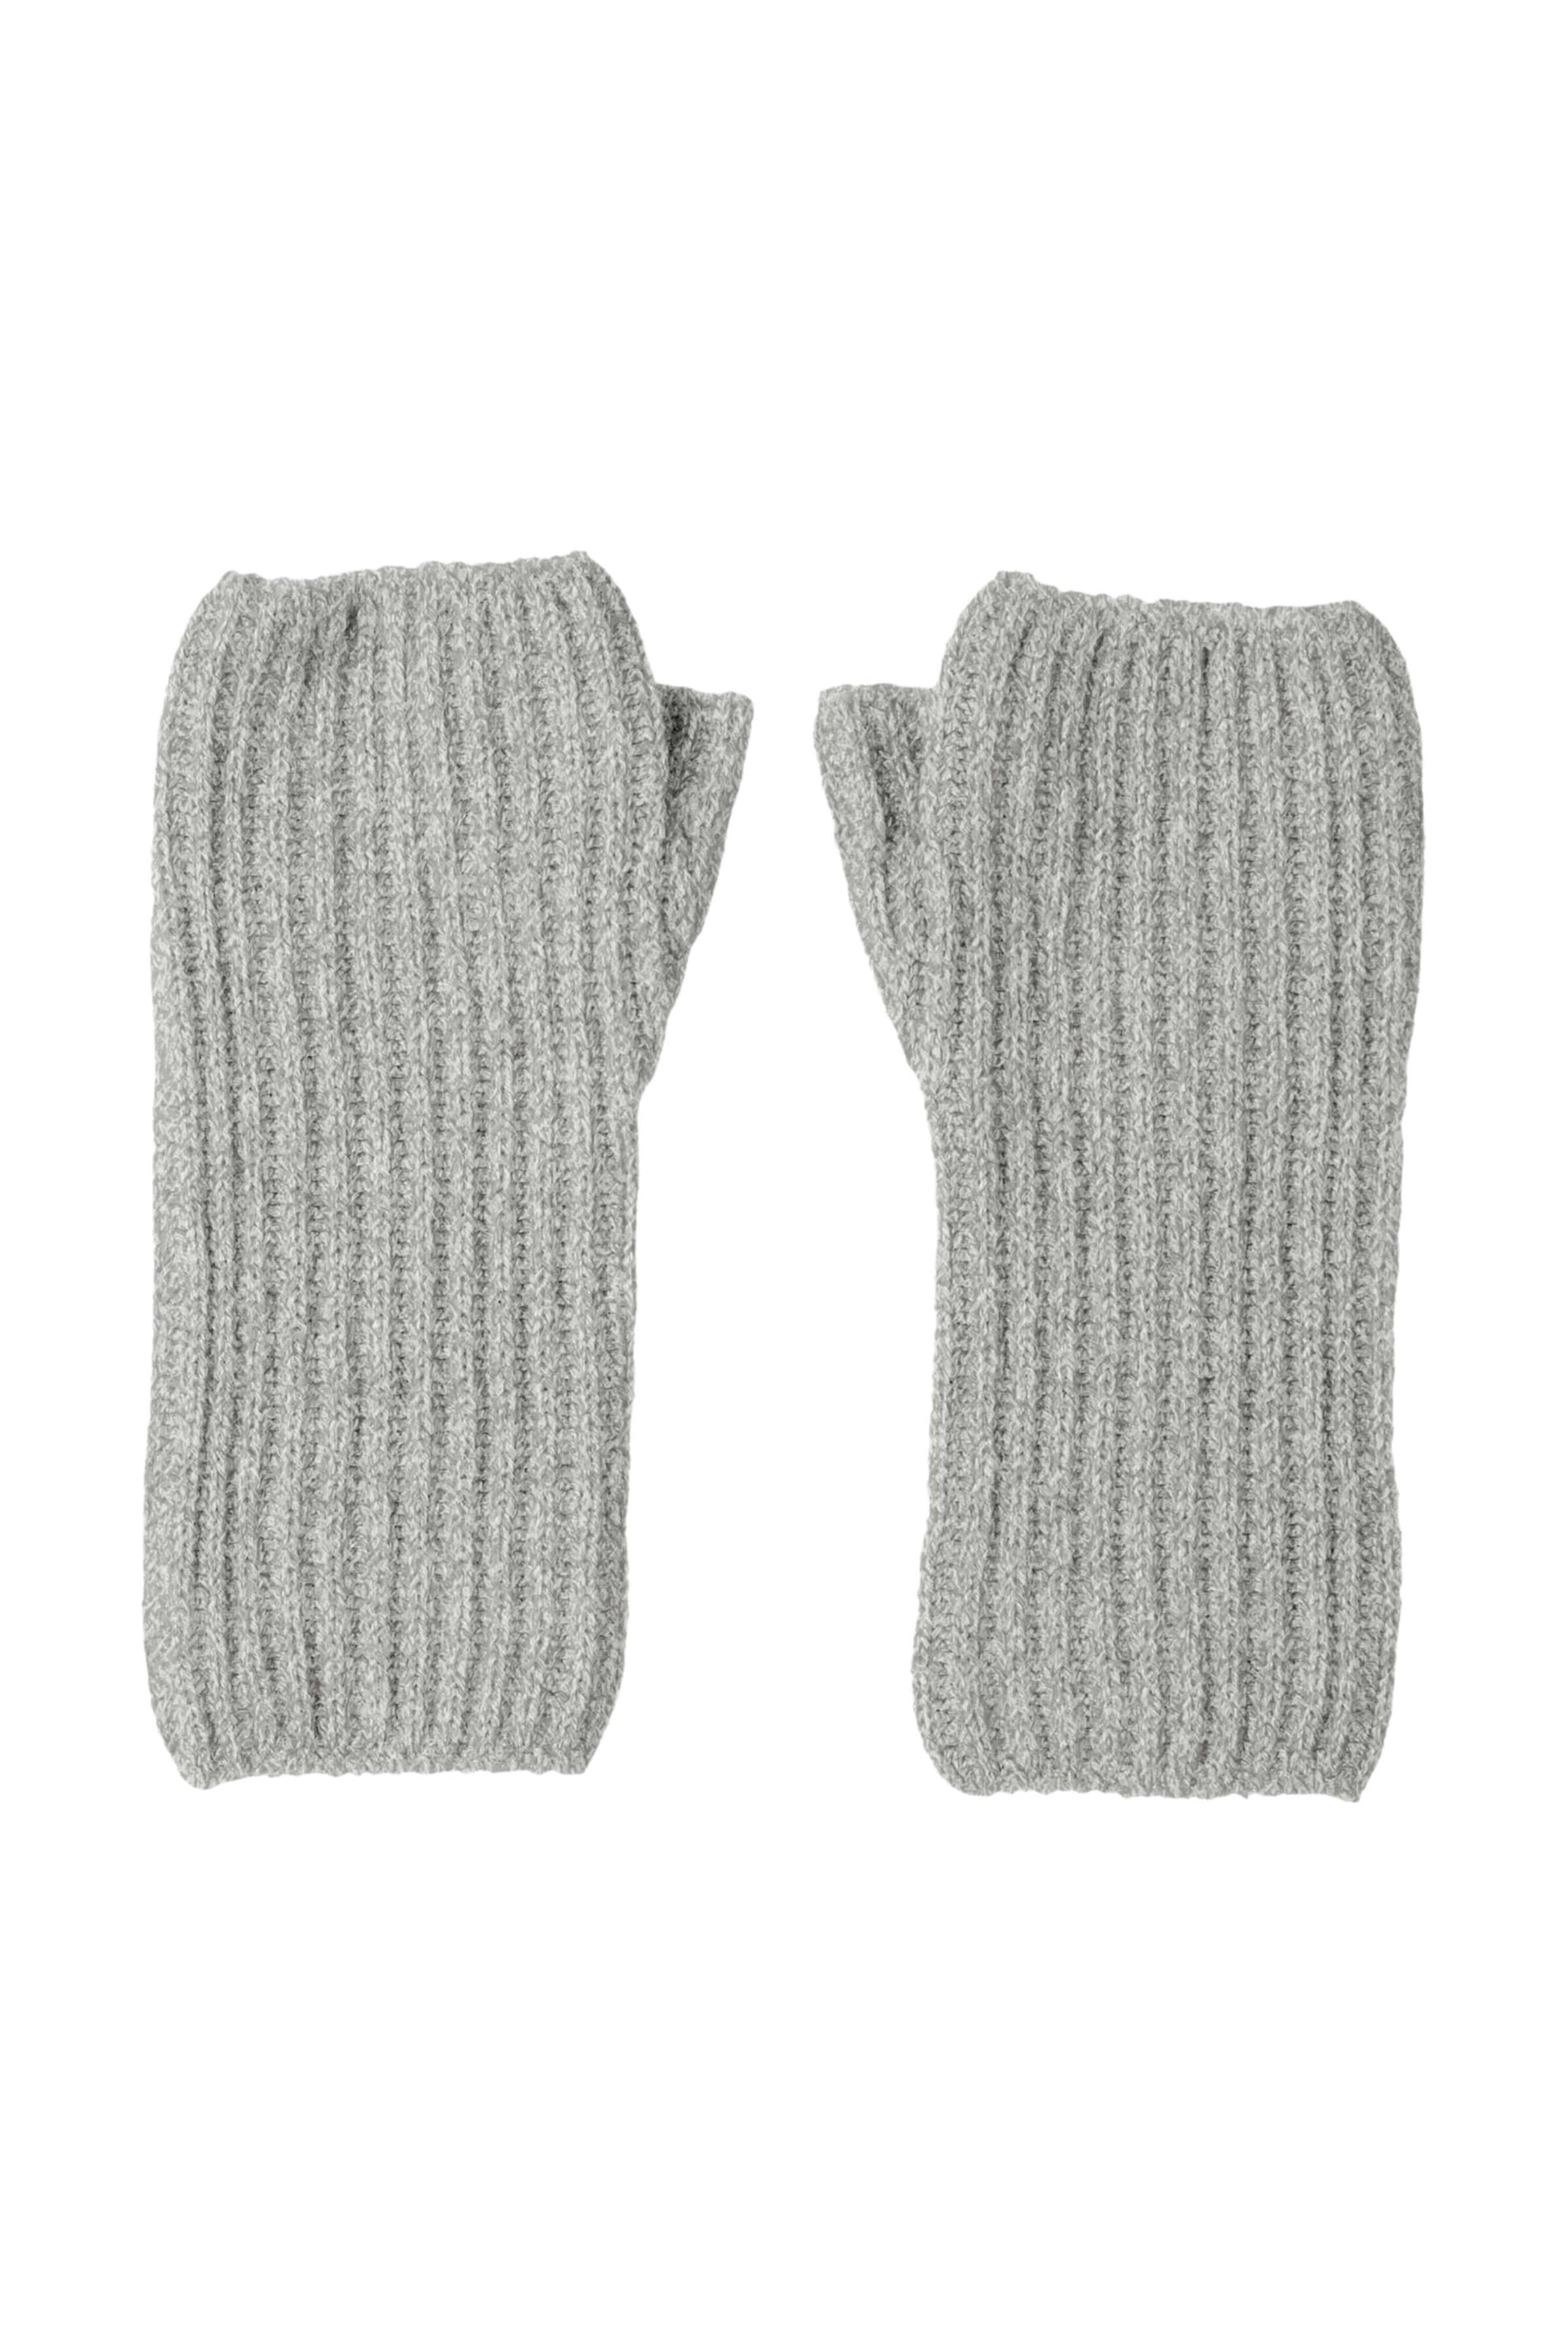 Johnstons of Elgin AW24 Knitted Accessory Light Grey Ribbed Cashmere Wrist Warmers HAE02681HA0308ONE